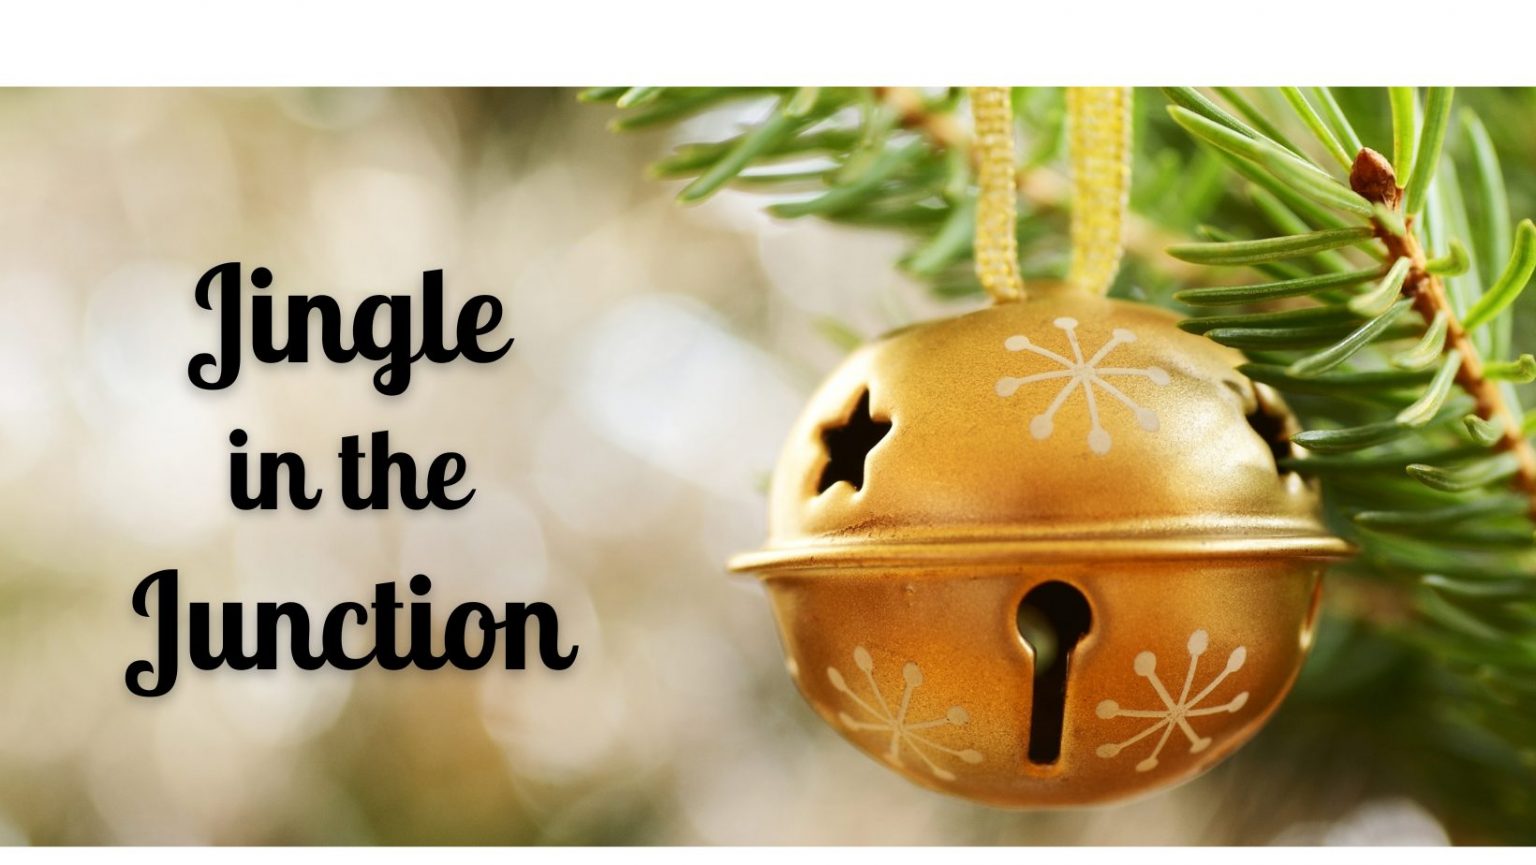 Jingle in the Junction Apache Junction Chamber of Commerce